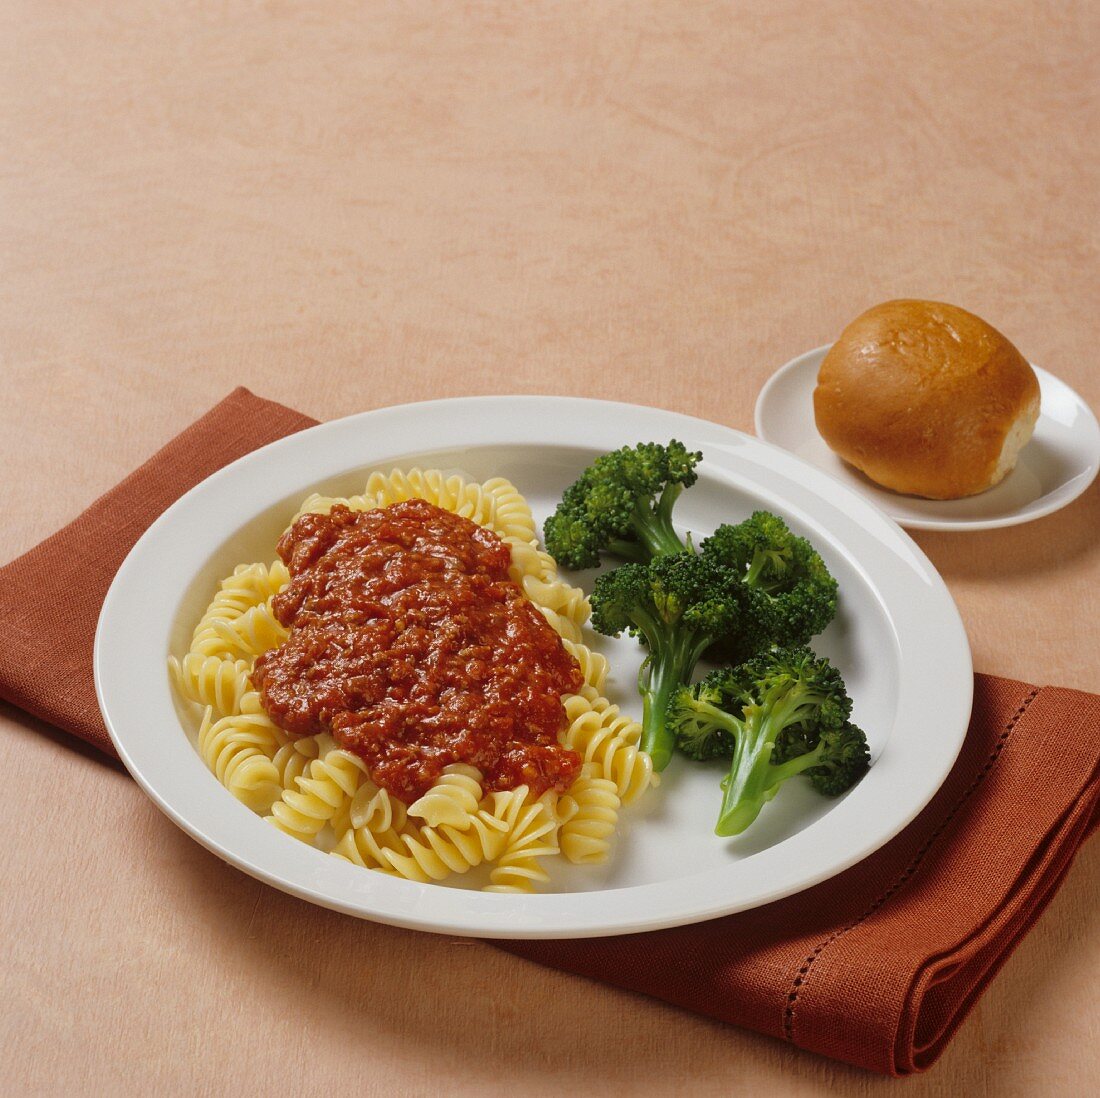 Rotini with Tomato Sauce and a Side of Broccoli; Dinner Roll